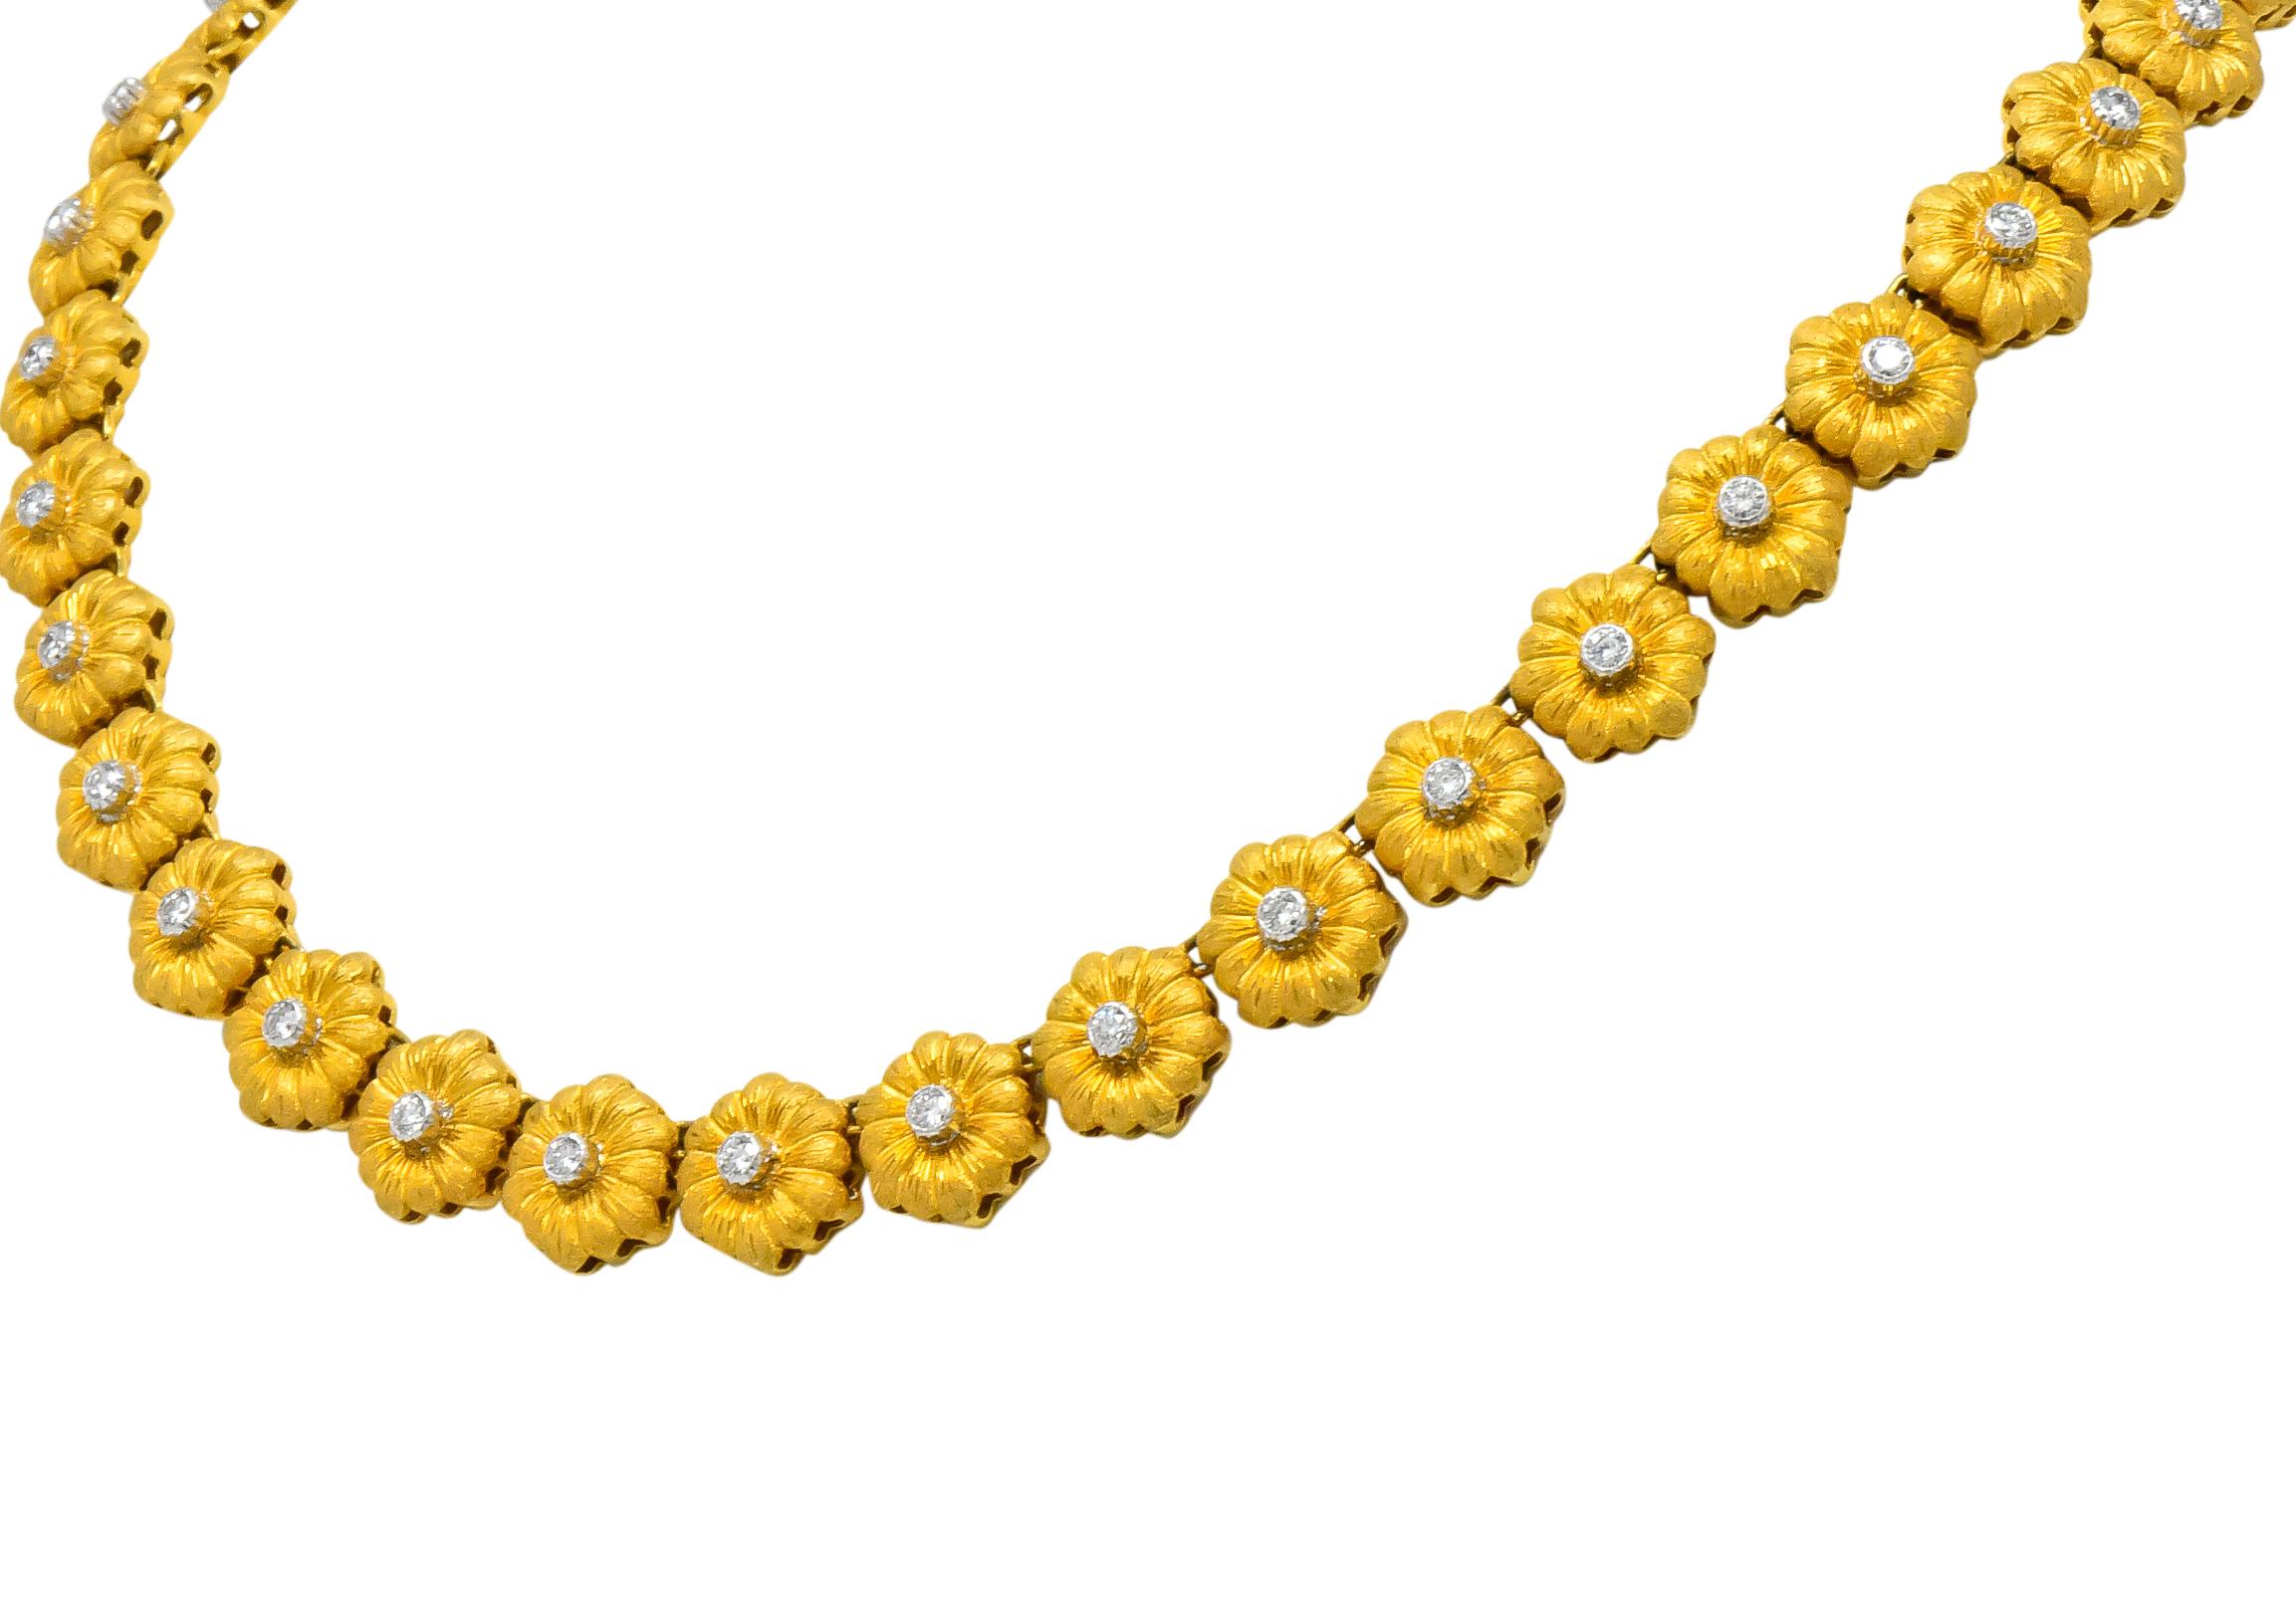 With rich textured gold flower links, with engraved gold detail

Each centering a round brilliant cut diamond in white gold

Thirty-eight diamonds, weighing approximately 1.90 carats total, G/H color and VS clarity
 
Completed by concealed clasp